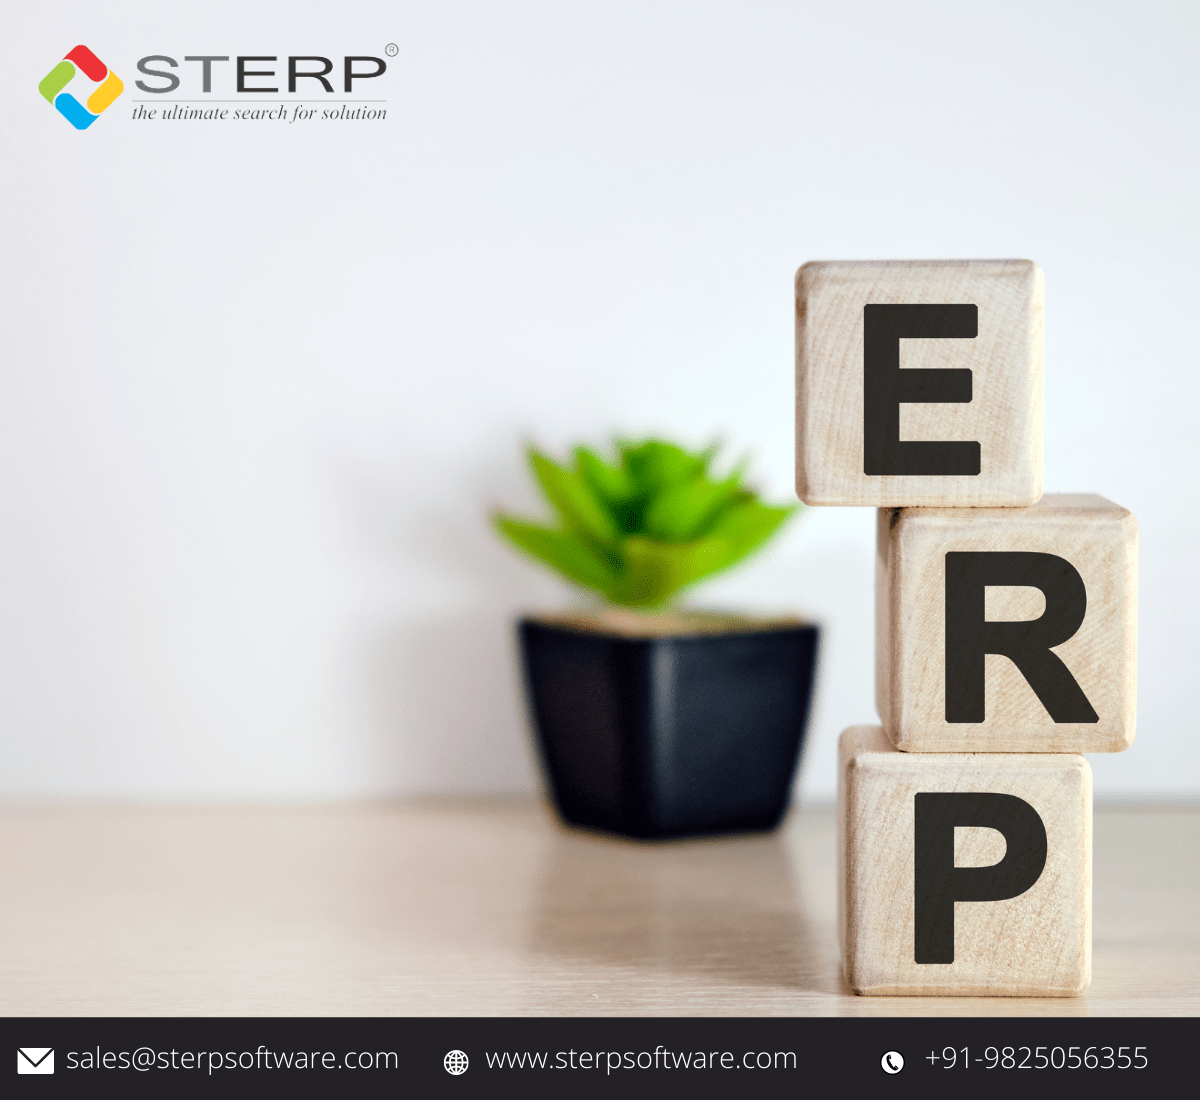 How to choose the Best Engineering ERP Software for your Business?